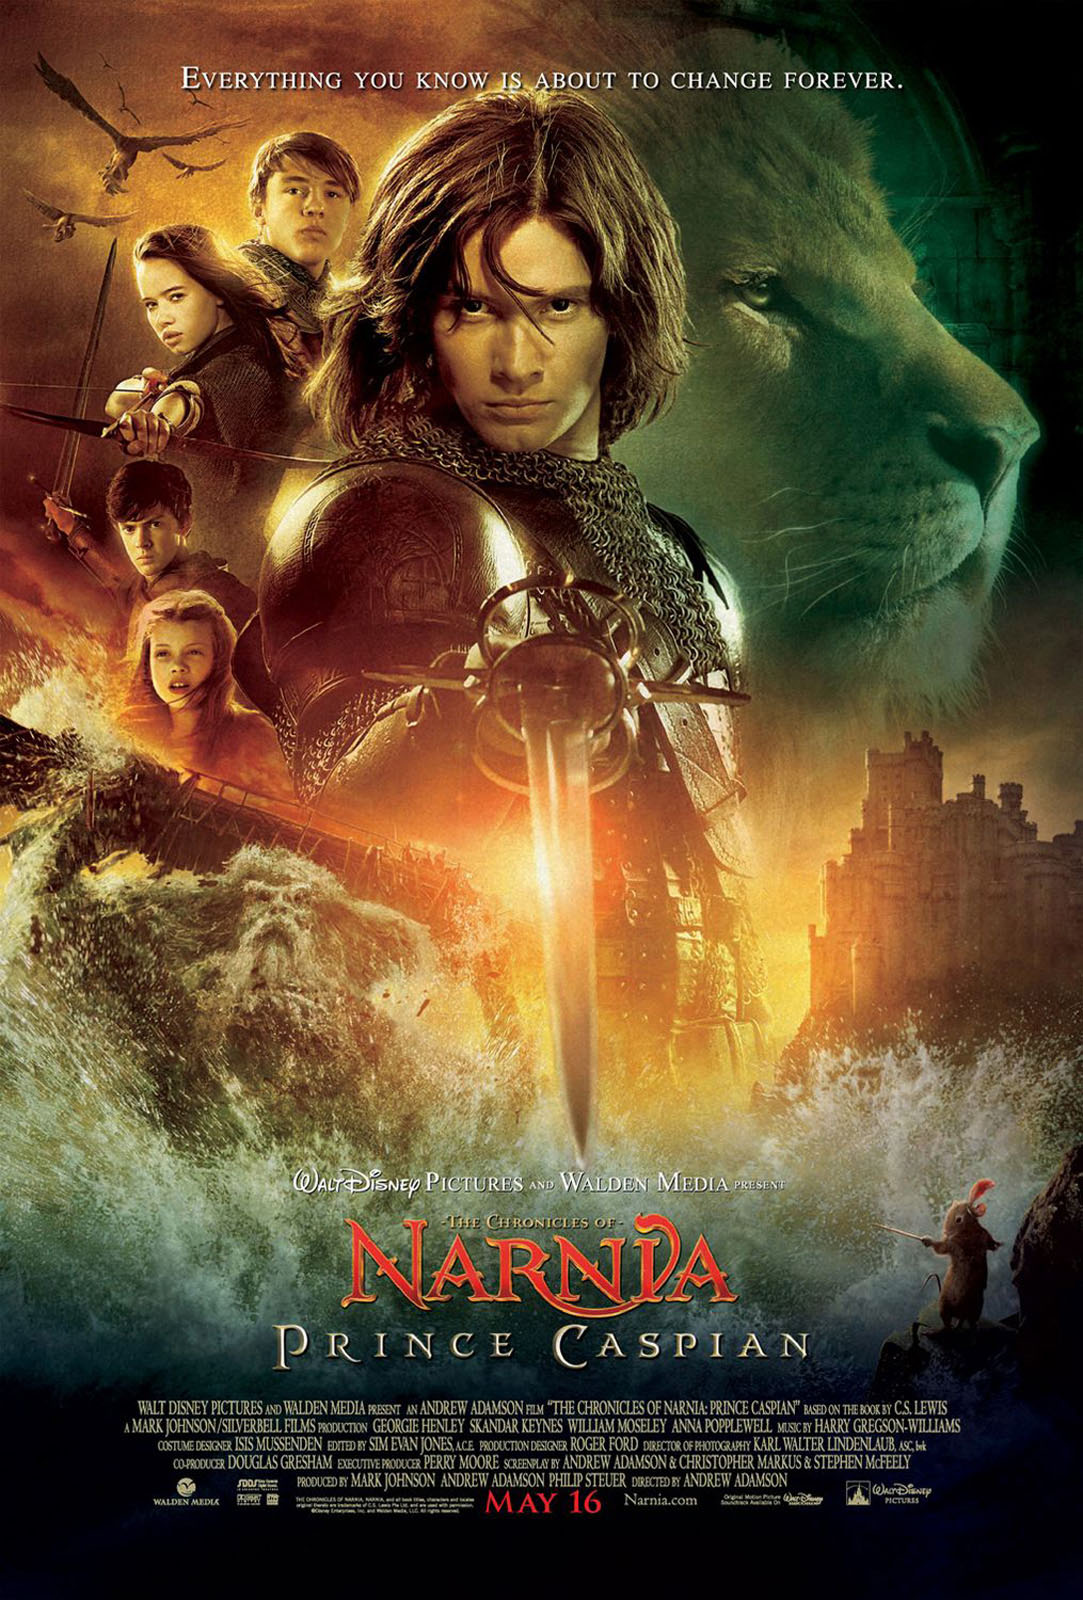 CHRONICLES OF NARNIA: PRINCE CASPIAN, THE